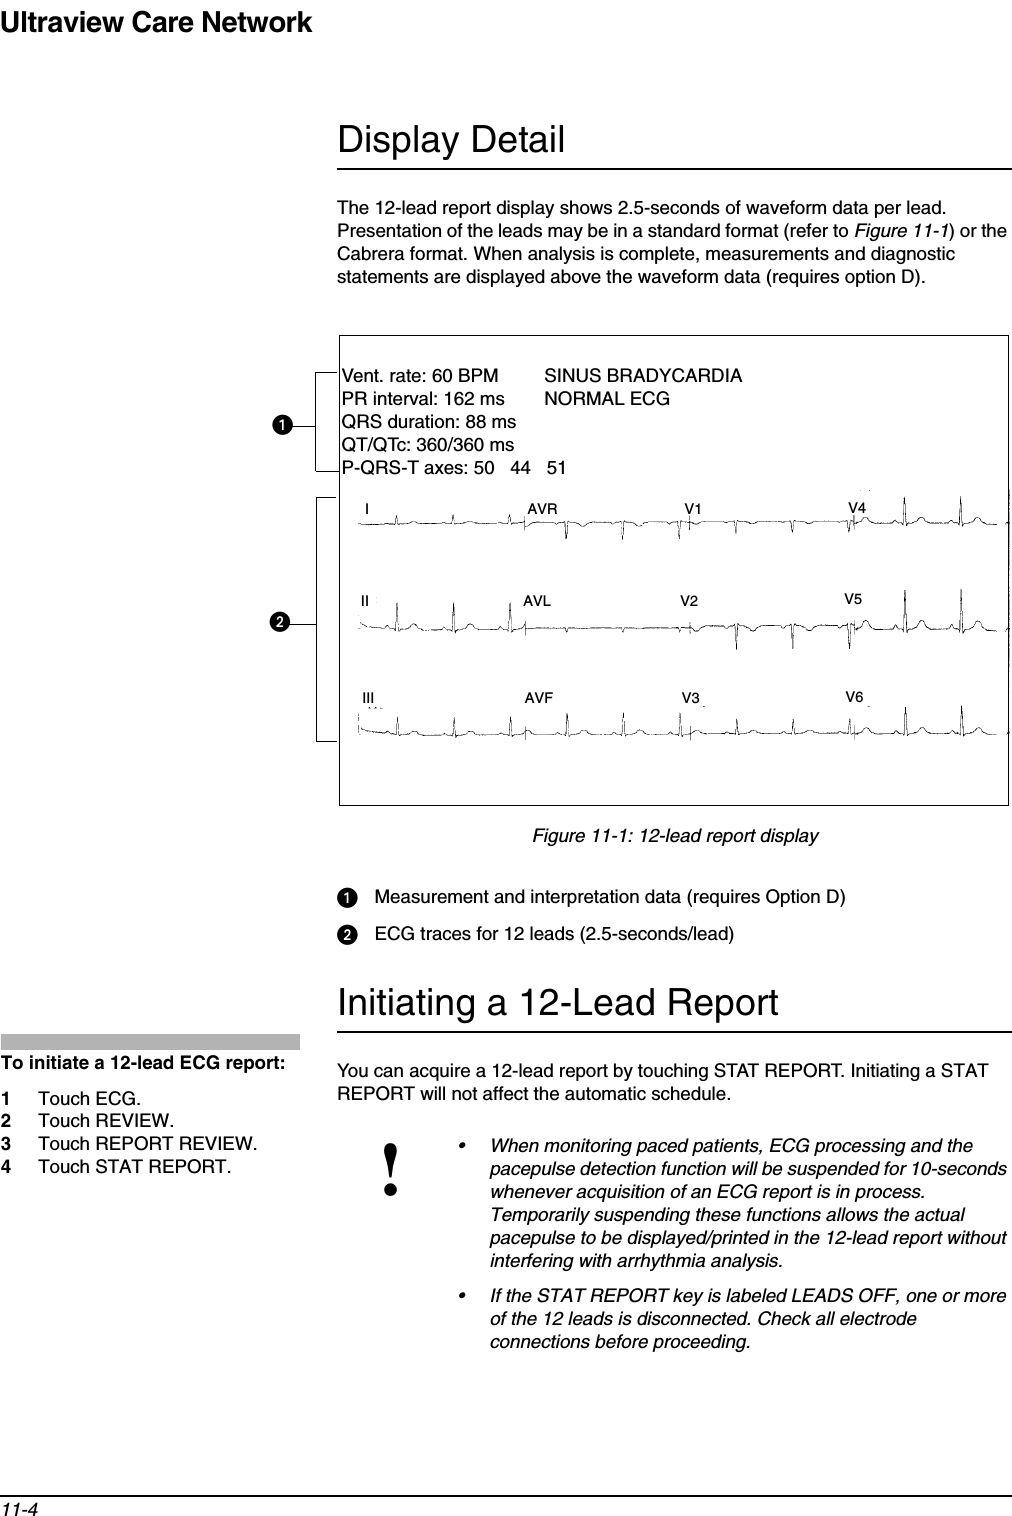 Ultraview Care Network11-4Display DetailThe 12-lead report display shows 2.5-seconds of waveform data per lead. Presentation of the leads may be in a standard format (refer to Figure 11-1) or the Cabrera format. When analysis is complete, measurements and diagnostic statements are displayed above the waveform data (requires option D).Figure 11-1: 12-lead report displayᕡMeasurement and interpretation data (requires Option D)ᕢECG traces for 12 leads (2.5-seconds/lead)Initiating a 12-Lead ReportYou can acquire a 12-lead report by touching STAT REPORT. Initiating a STAT REPORT will not affect the automatic schedule.!• When monitoring paced patients, ECG processing and the pacepulse detection function will be suspended for 10-seconds whenever acquisition of an ECG report is in process. Temporarily suspending these functions allows the actual pacepulse to be displayed/printed in the 12-lead report without interfering with arrhythmia analysis.• If the STAT REPORT key is labeled LEADS OFF, one or more of the 12 leads is disconnected. Check all electrode connections before proceeding.ᕡᕢVent. rate: 60 BPM SINUS BRADYCARDIAPR interval: 162 ms NORMAL ECGQRS duration: 88 msQT/QTc: 360/360 msP-QRS-T axes: 50   44   51I AVR V1 V4II AVL V2 V5III AVF V3 V6To initiate a 12-lead ECG report:1Touch ECG.2Touch REVIEW.3Touch REPORT REVIEW.4Touch STAT REPORT.